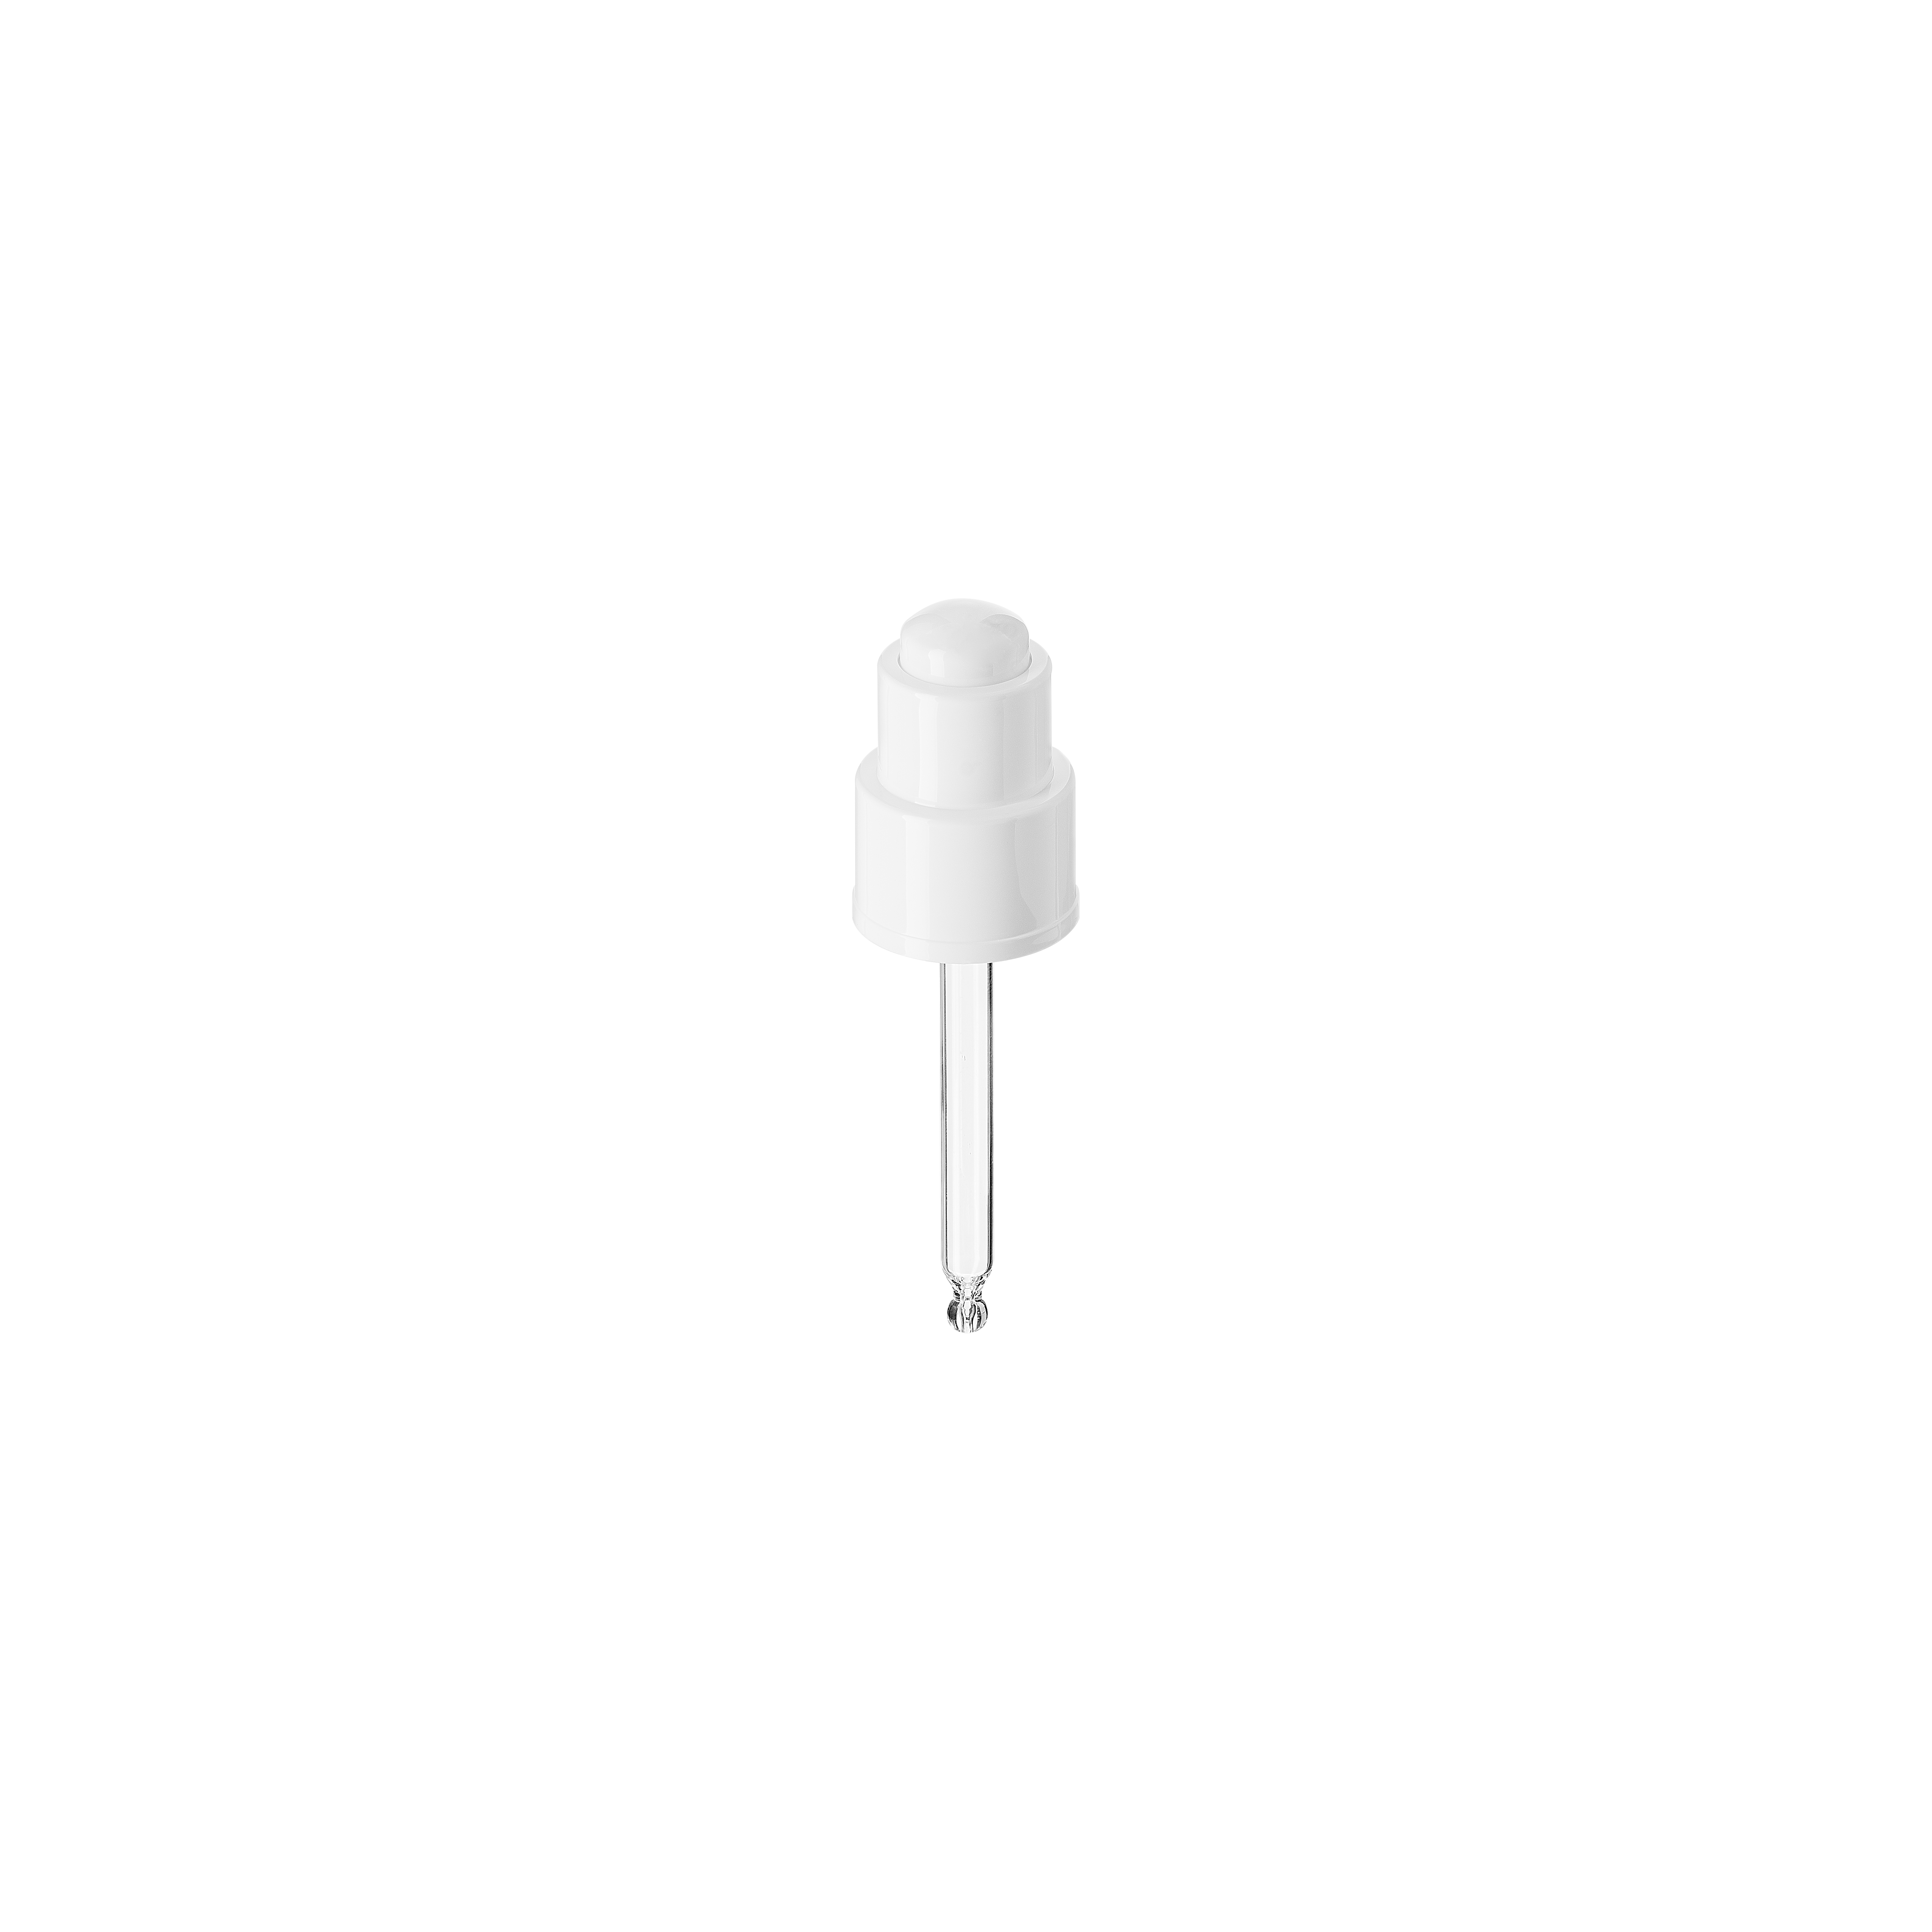 Push-button pipette 24/410, PP/ABS, white glossy finish, white button bulb Nitrile 0.4 ml, ball tip, straight for Laurel 50 ml